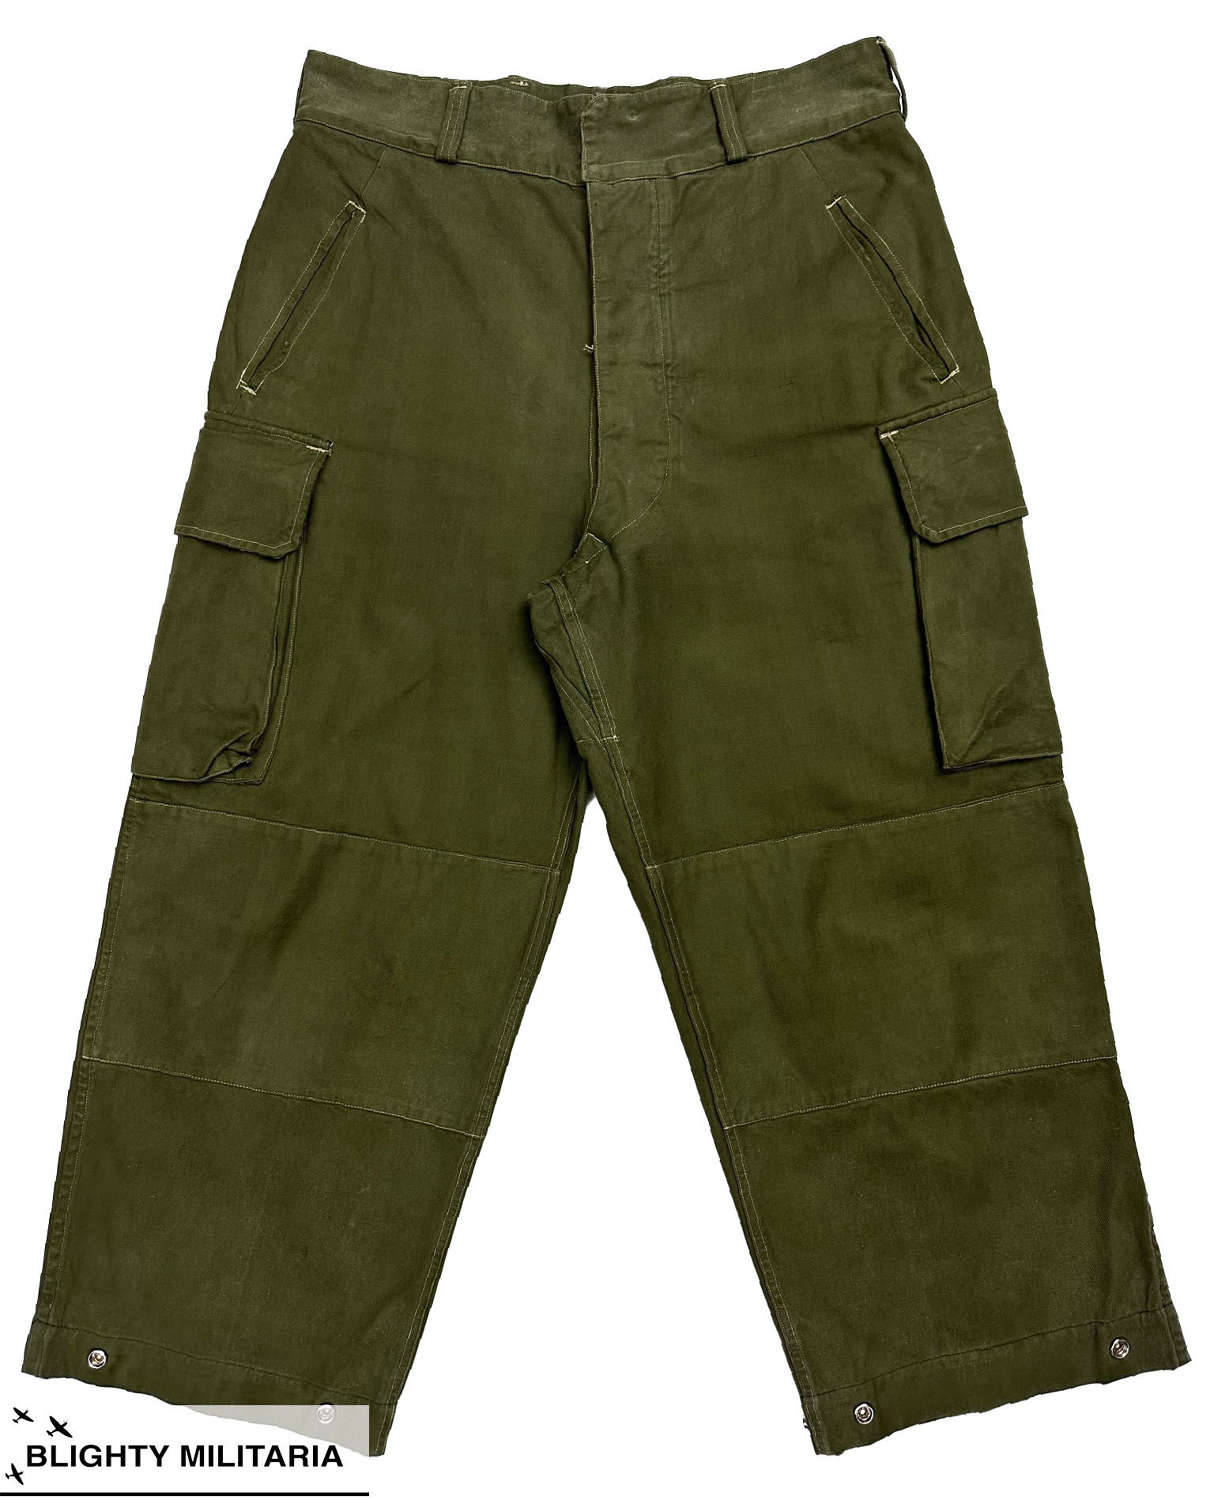 Original 1950s French Army M47 Trousers - Size 35x26